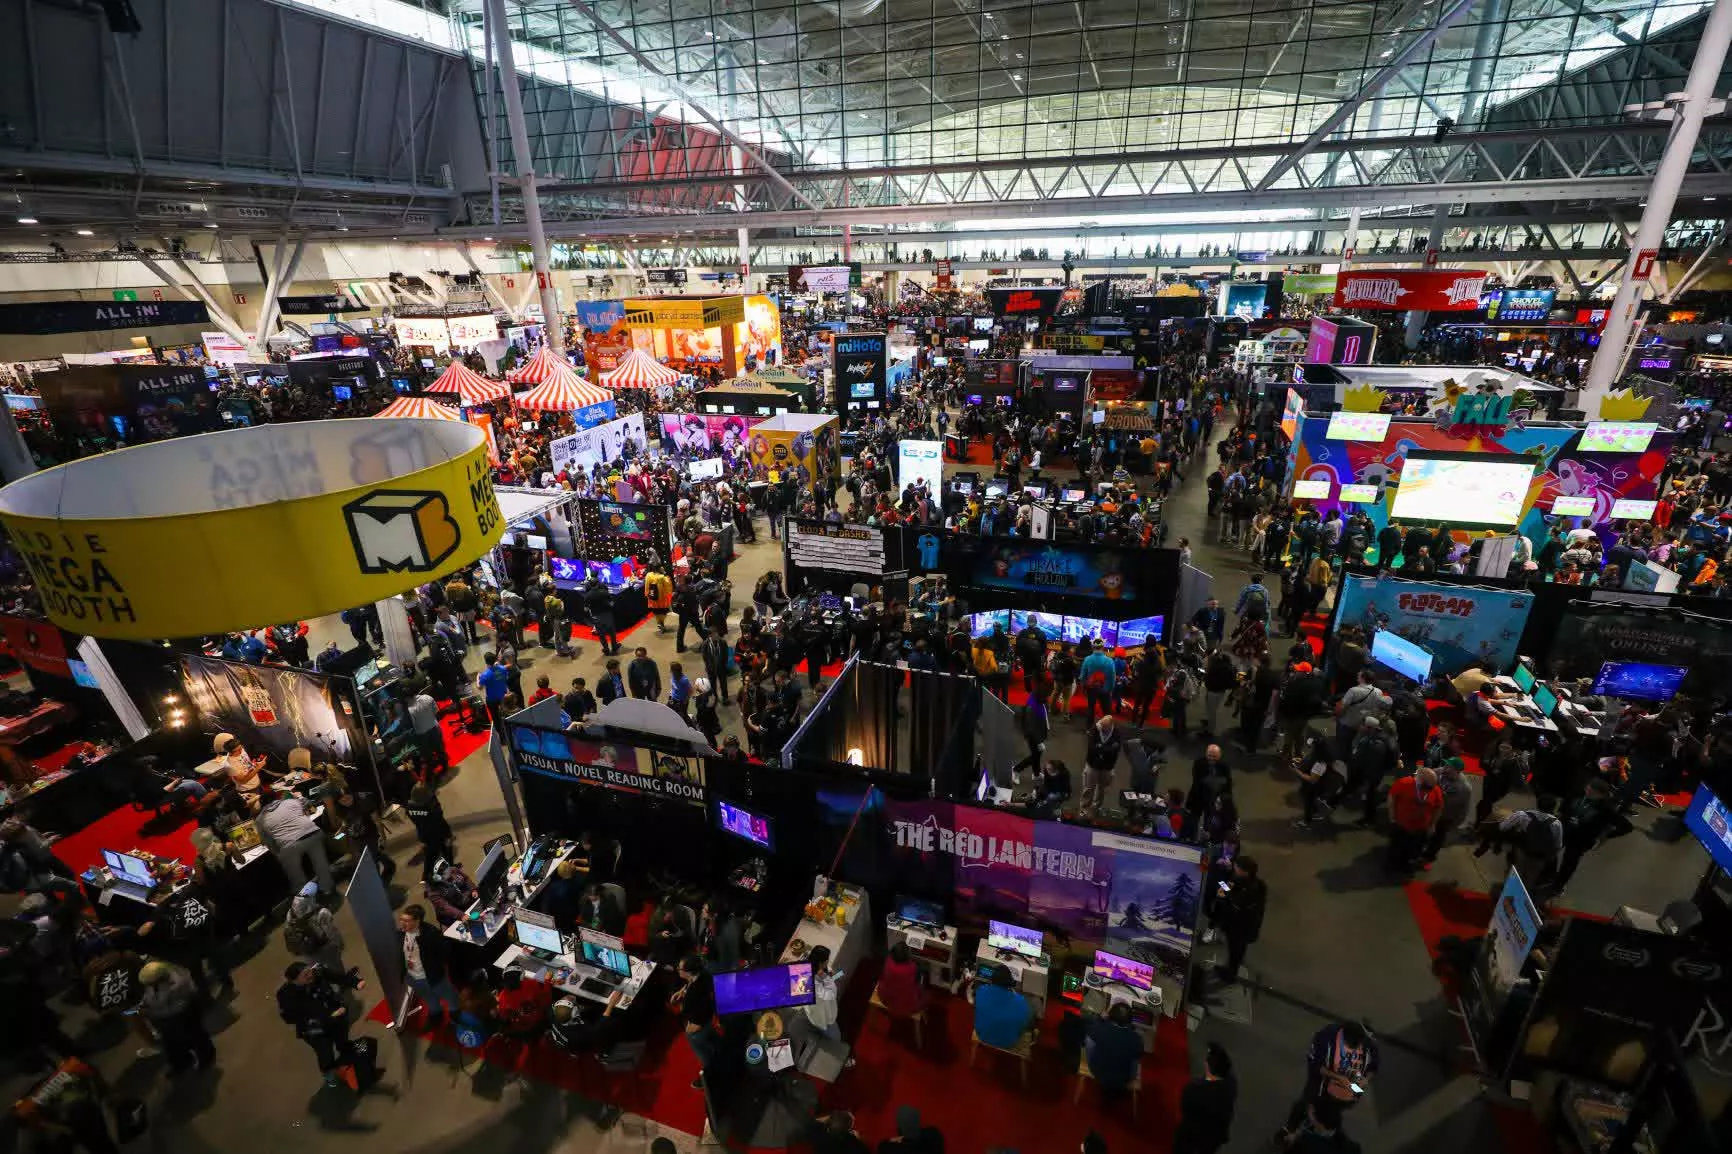 PAX is planning to host in-person events in 2021